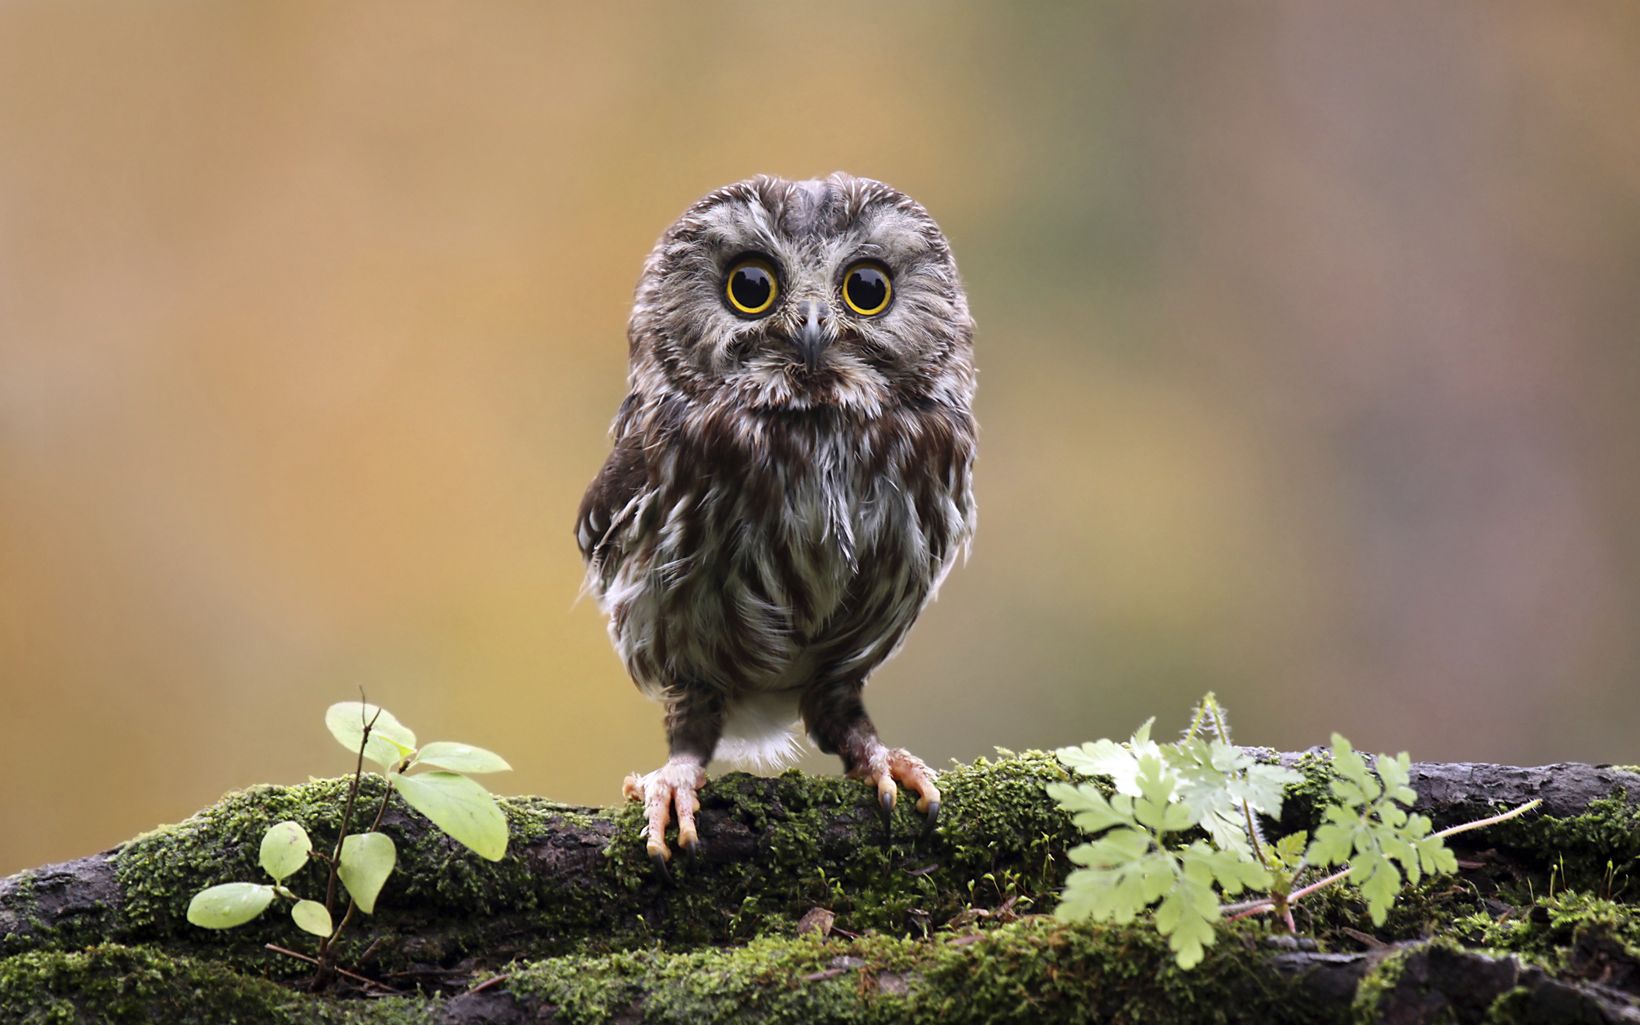 a small brown and white owl standing on a mossy tree branch and looking directly at the camera